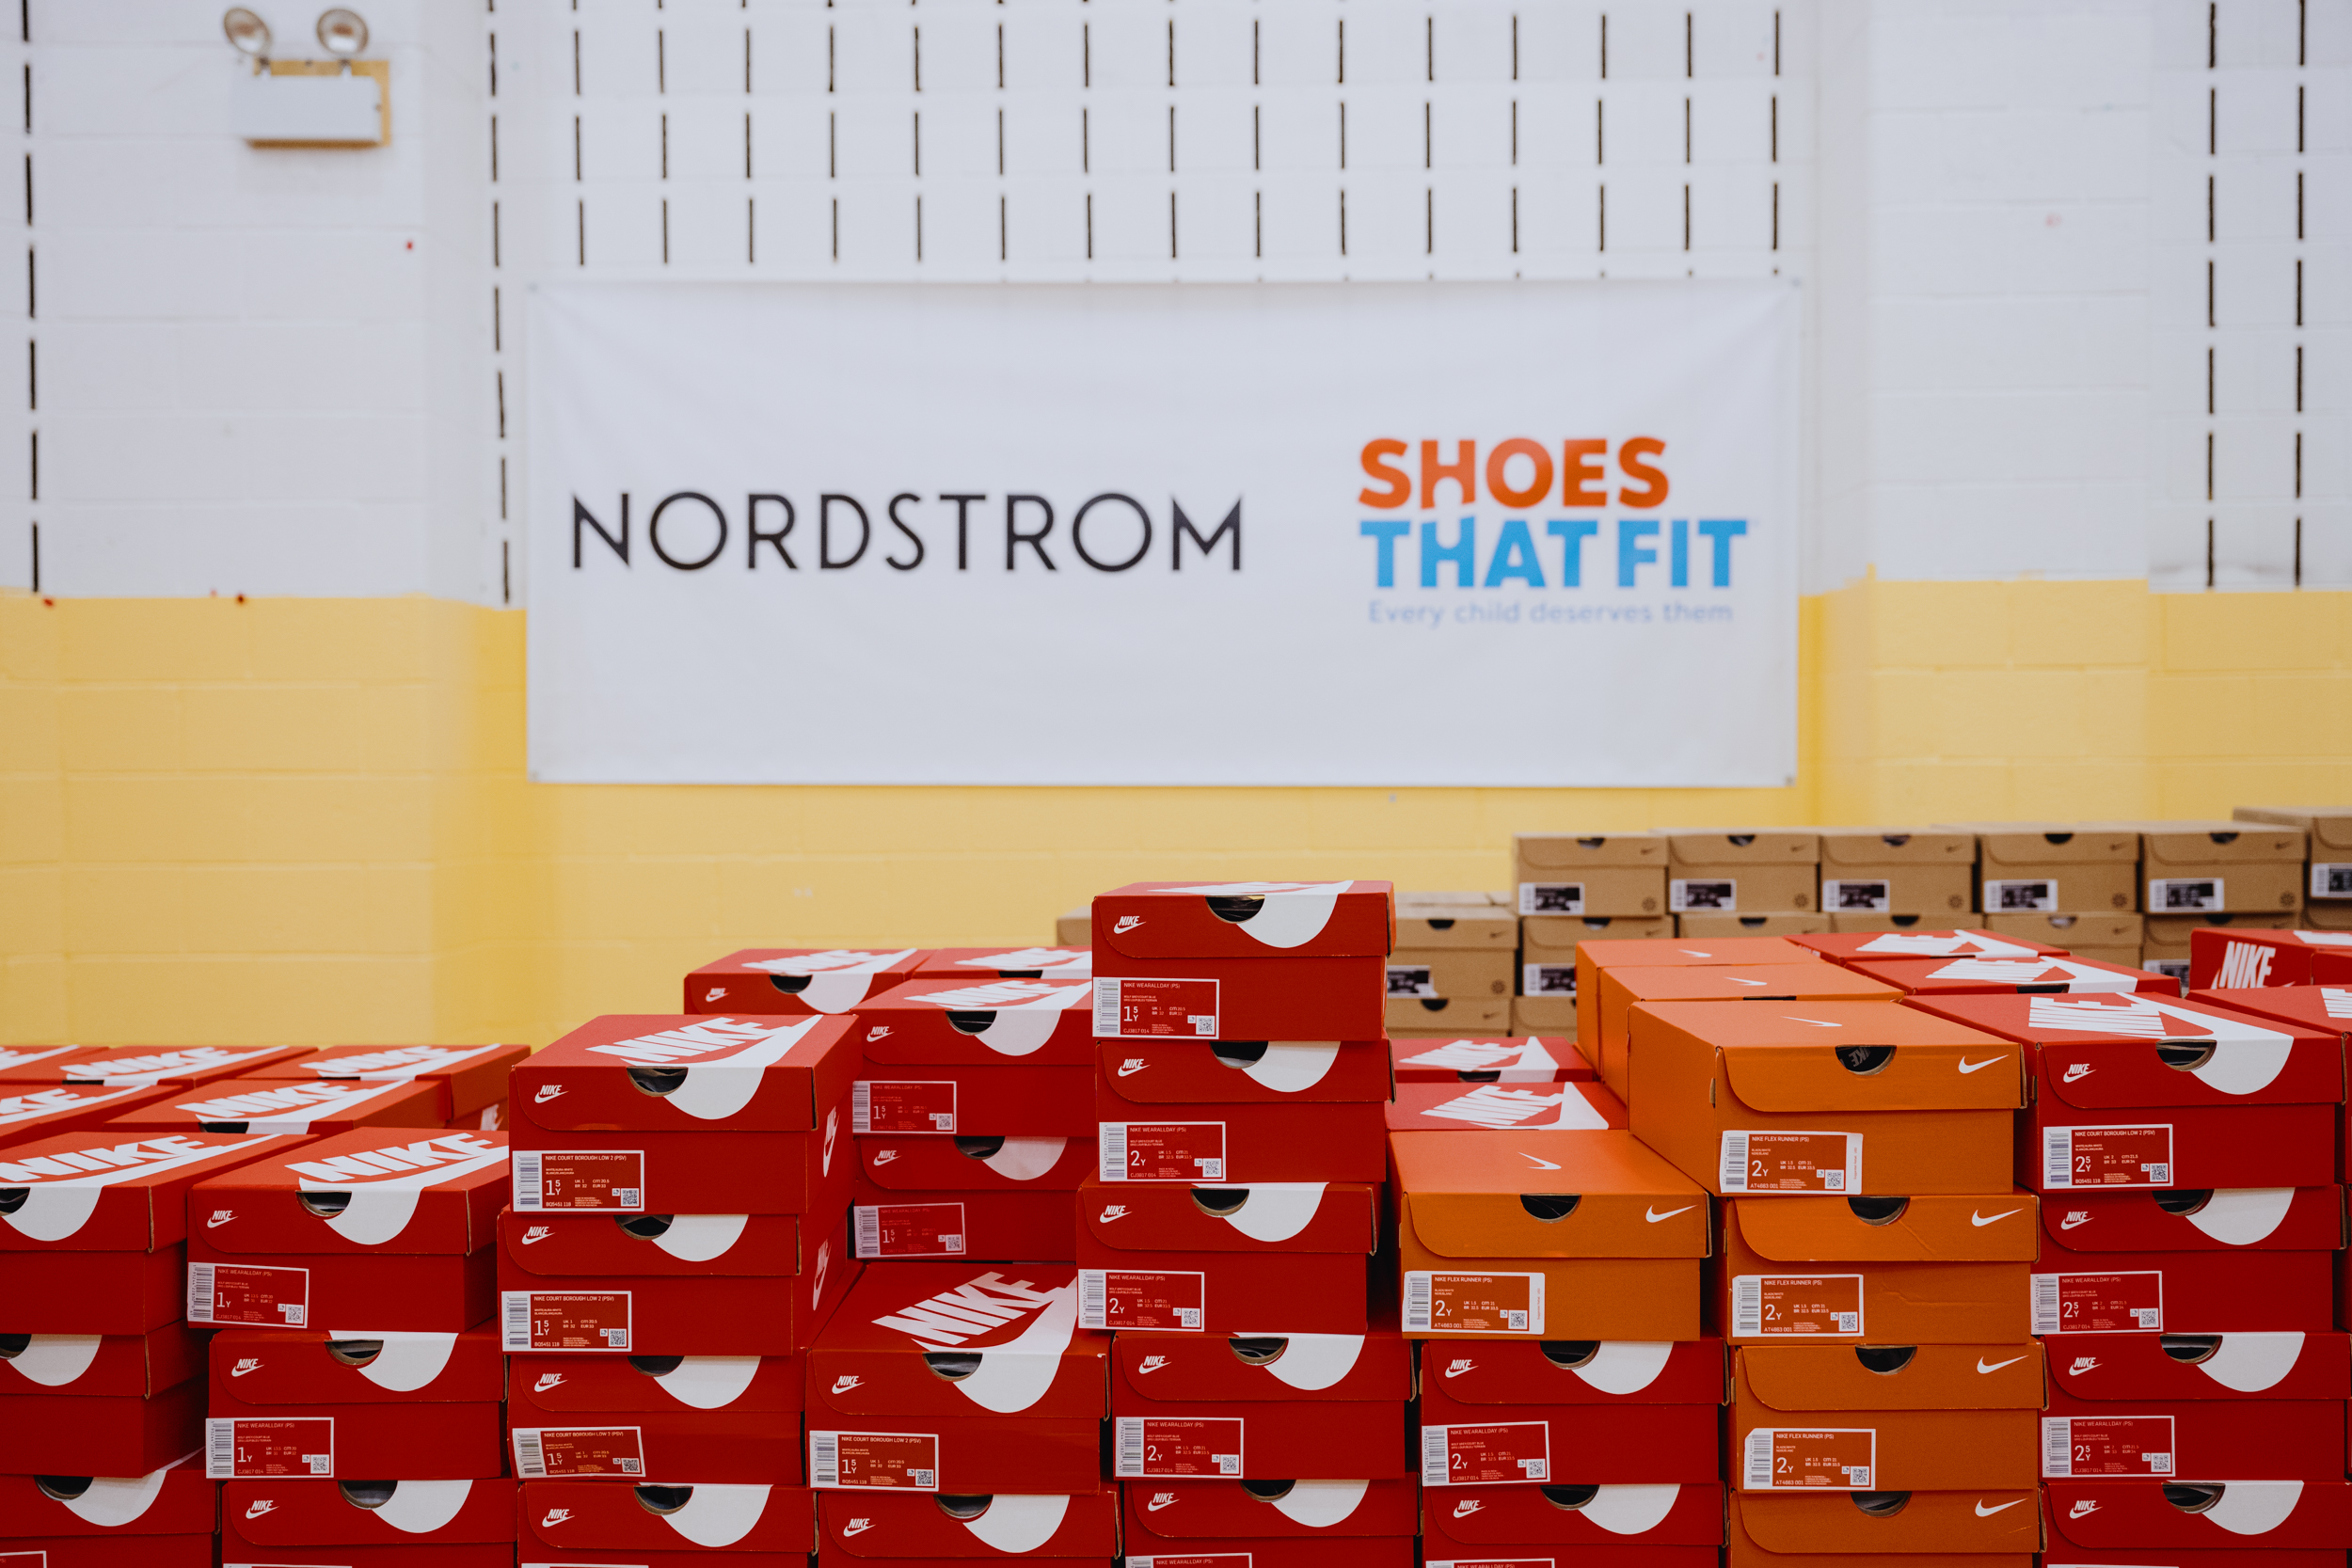 Nordstrom and Customers Raise More Than $1 Million for Shoes That Fit